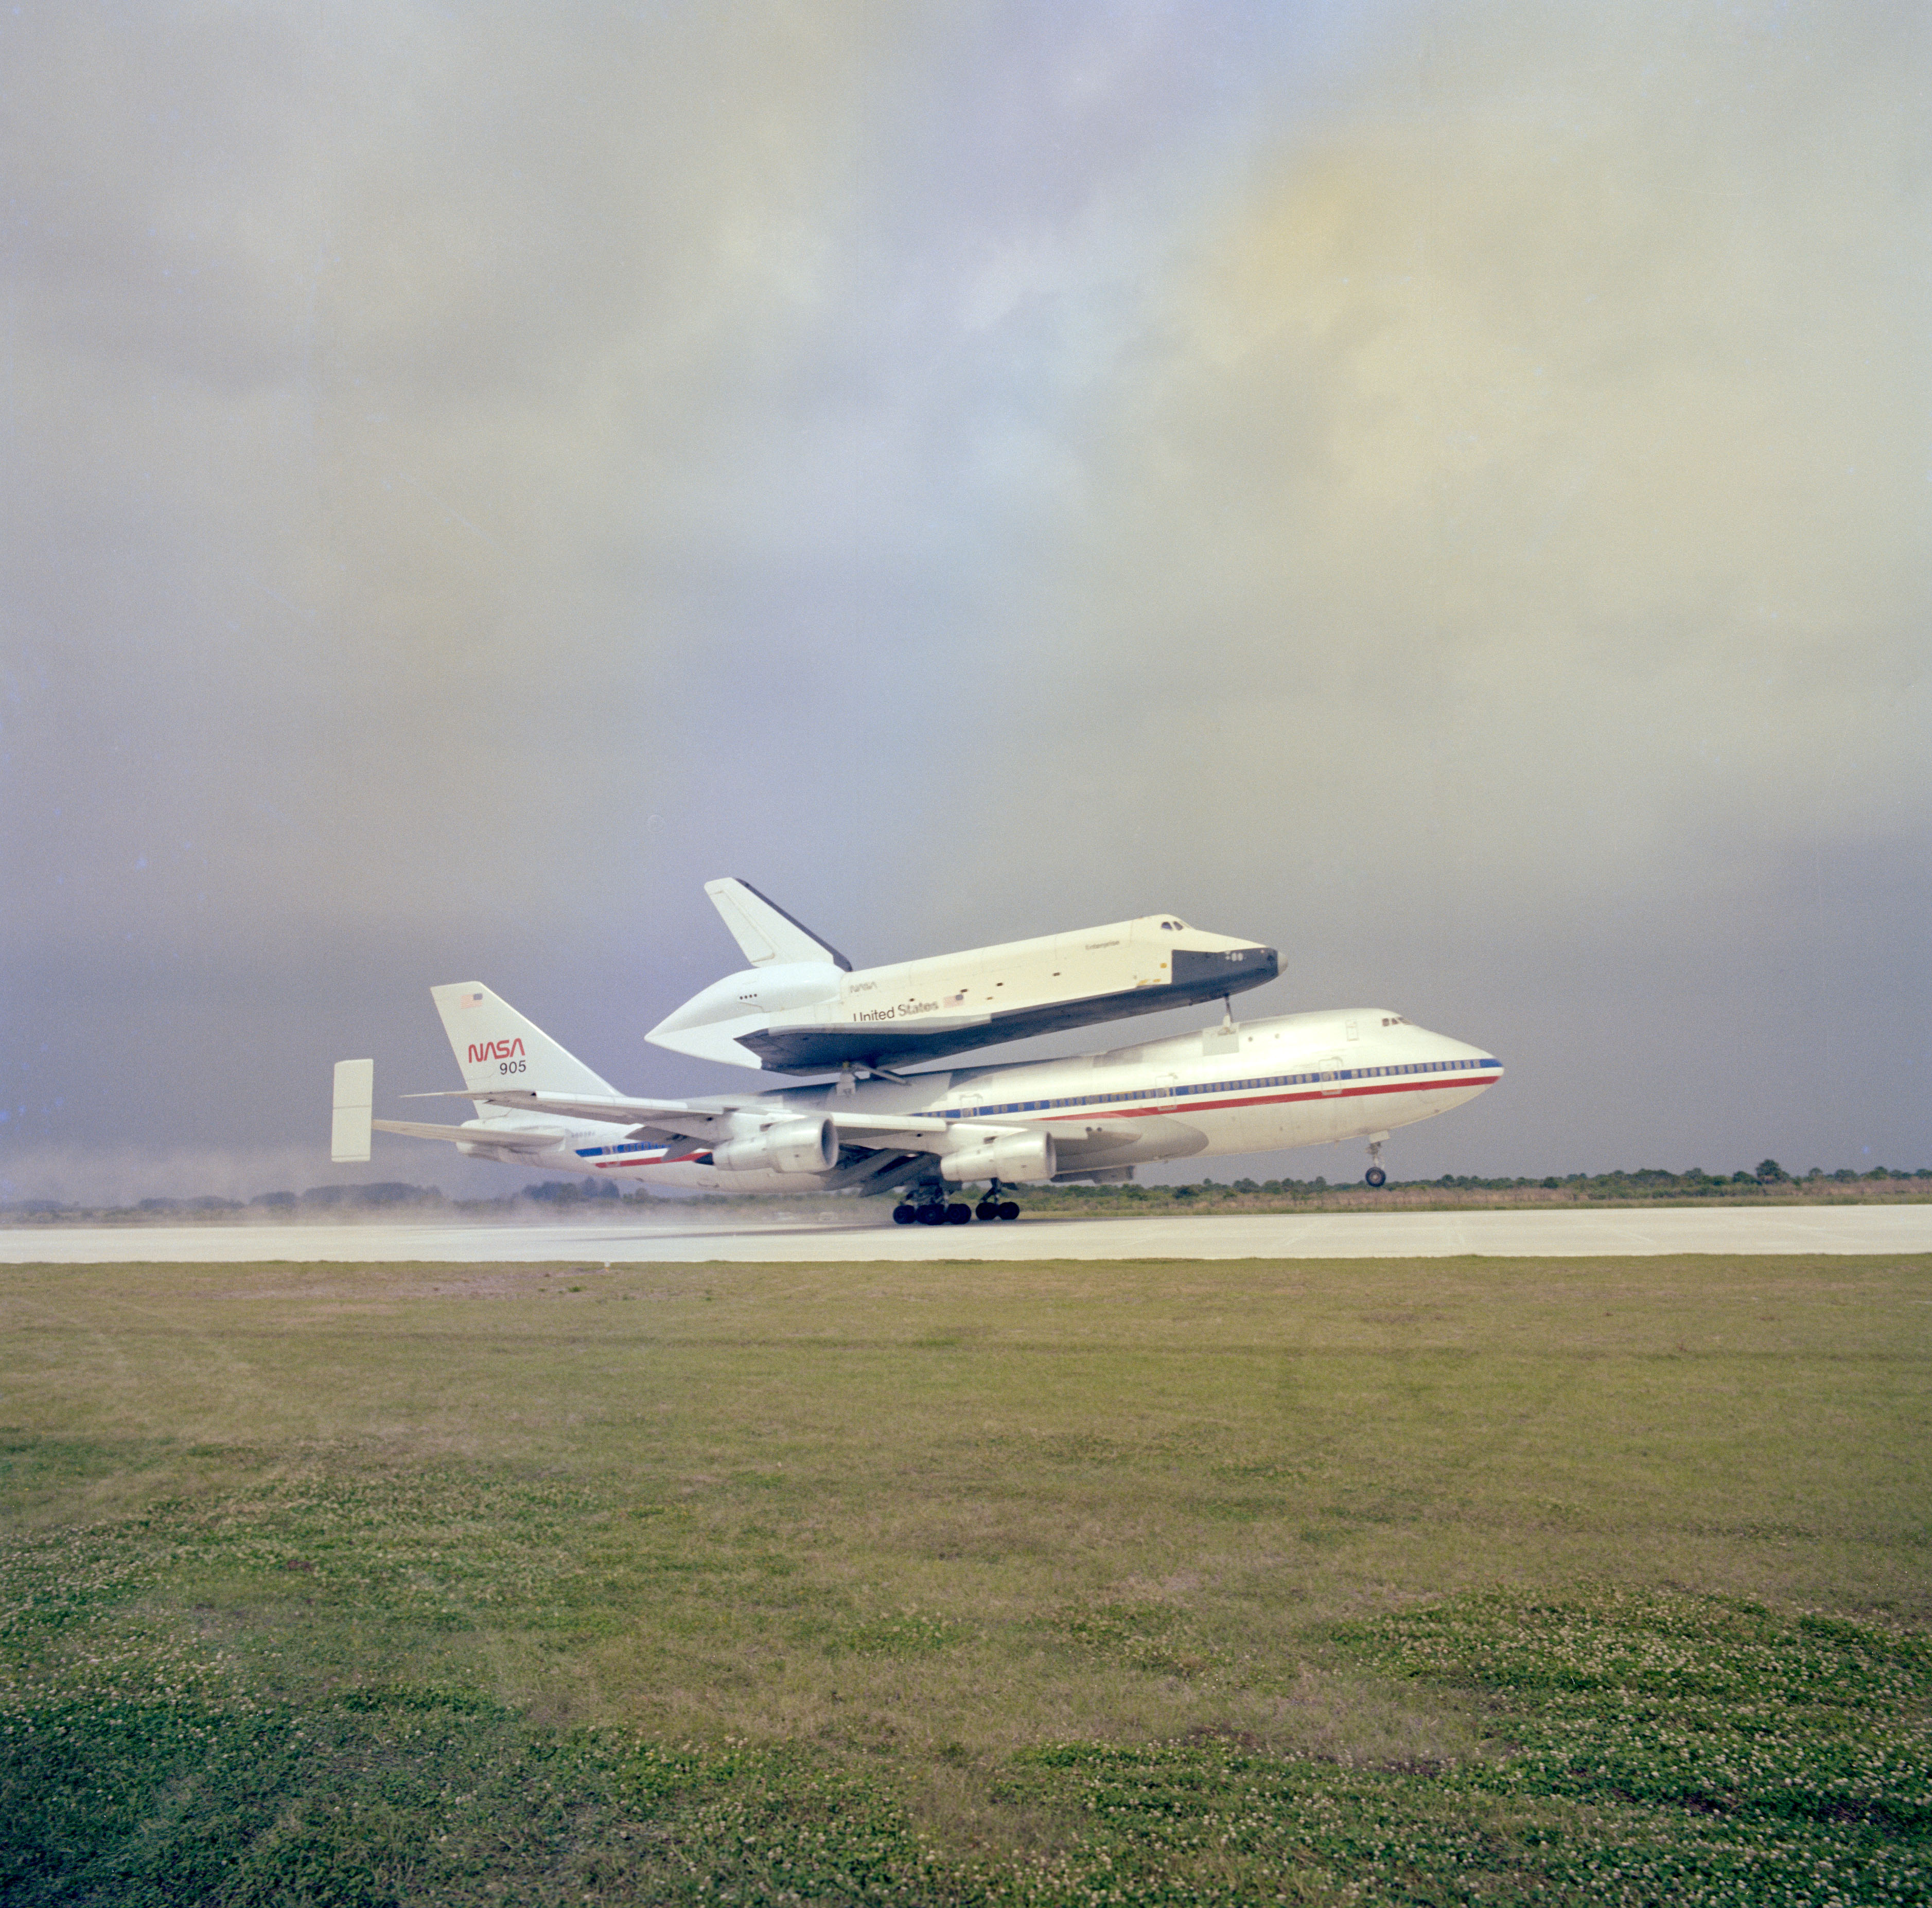 In January 1977, workers trucked Enterprise 36 miles overland from Palmdale to NASA's Dryden, now Armstrong, Flight Research Center at Edwards Air Force Base (AFB) in California, for the ALT program, a series of increasingly complex flights to evaluate the shuttle's air worthiness. At Dryden, workers placed Enterprise on the back of the Shuttle Carrier Aircraft (SCA), a modified Boeing 747. The duo began taxi runs in February, followed by the first captive inactive flight later that month. The first captive active flight with a crew aboard the orbiter took place in June, and Enterprise made its first independent flight on Aug. 12 with Haise and Fullerton at the controls. Four additional approach and landing flights completed the ALT program by October. In March 1978, Enterprise began its first cross-country trip. Riding atop the SCA, Enterprise left Edwards, and after a weekend stopover at Houston's Ellington AFB, arrived at the Redstone Arsenal's airfield in Huntsville, Alabama. Workers trucked Enterprise to the adjacent NASA Marshall Space Flight Center where engineers for the first time mated it with an External Tank (ET) and inert Solid Rocket Boosters (SRB) in the Dynamic Structural Test Facility. For the next year, engineers conducted a series of vibration tests on the combined vehicle, simulating conditions expected during an actual launch.